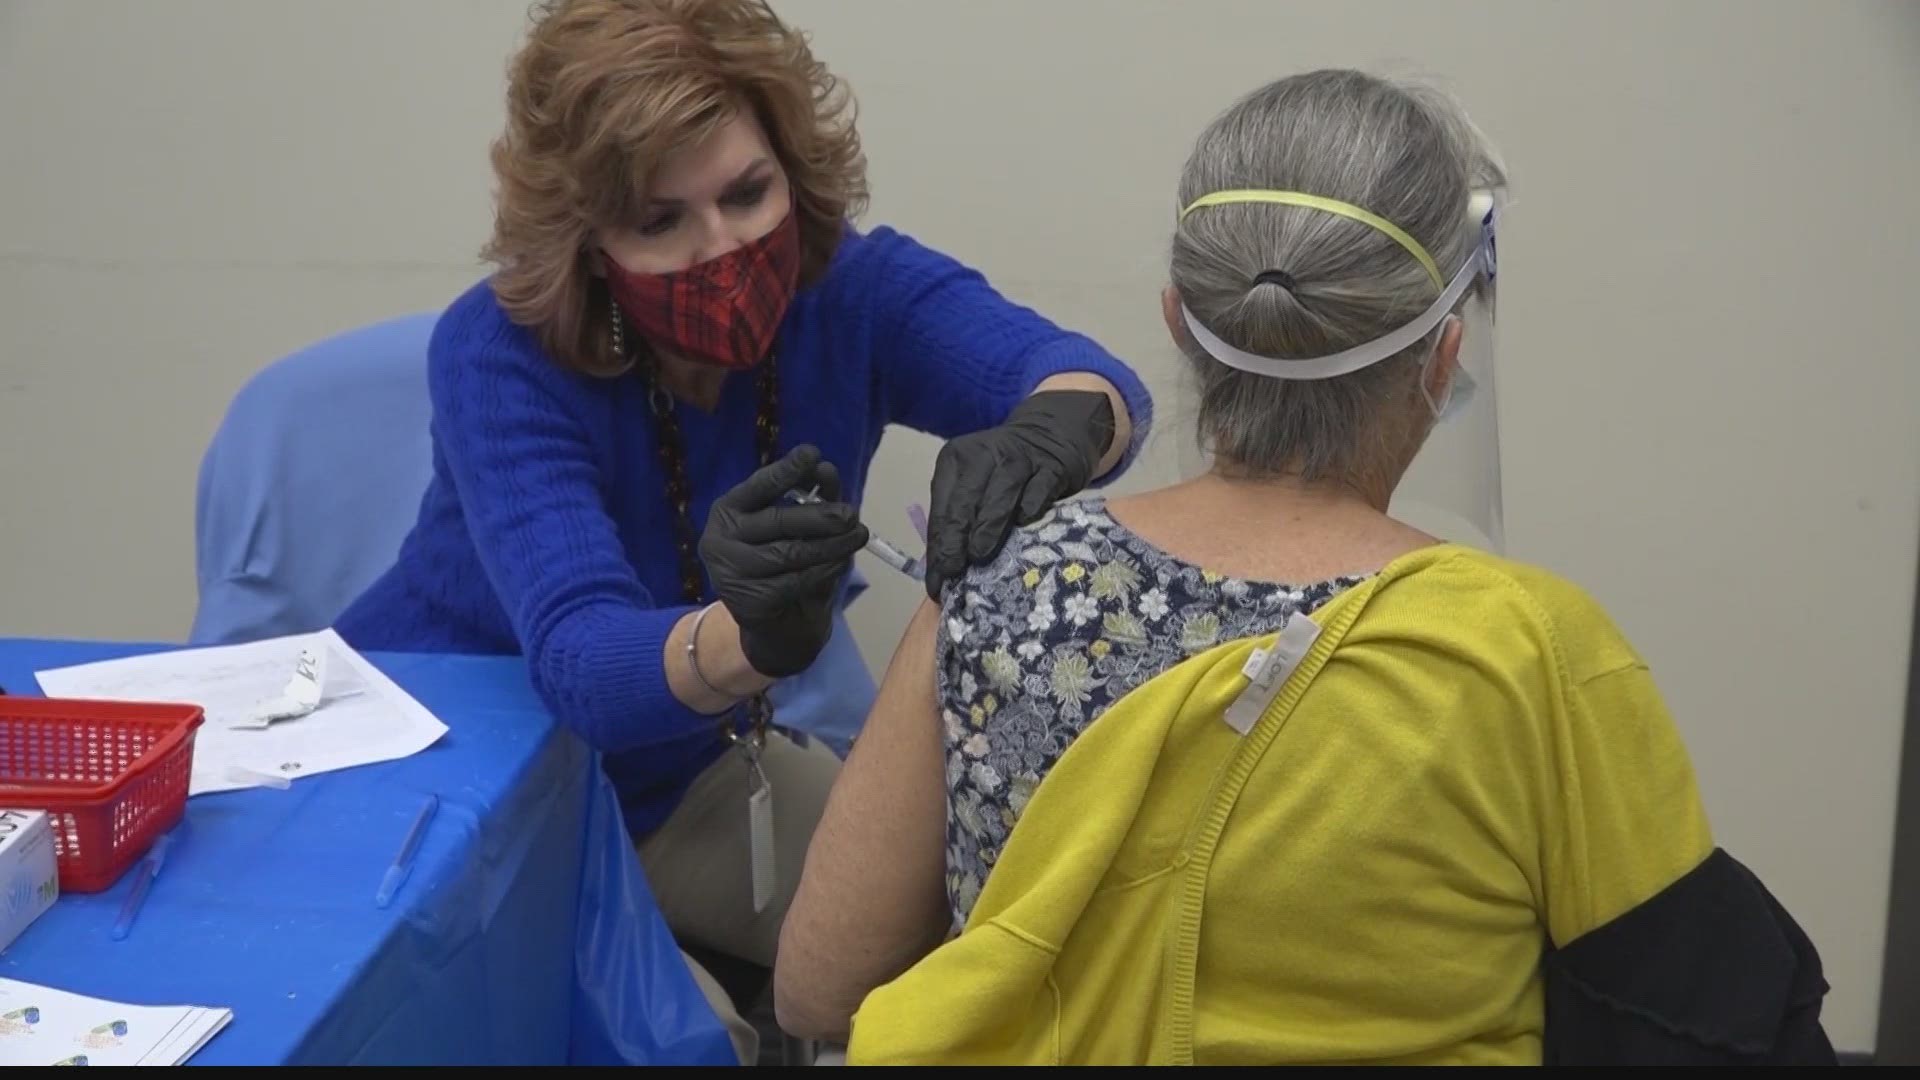 Huntsville leaders discussed issues regarding COVID vaccines, including scams.